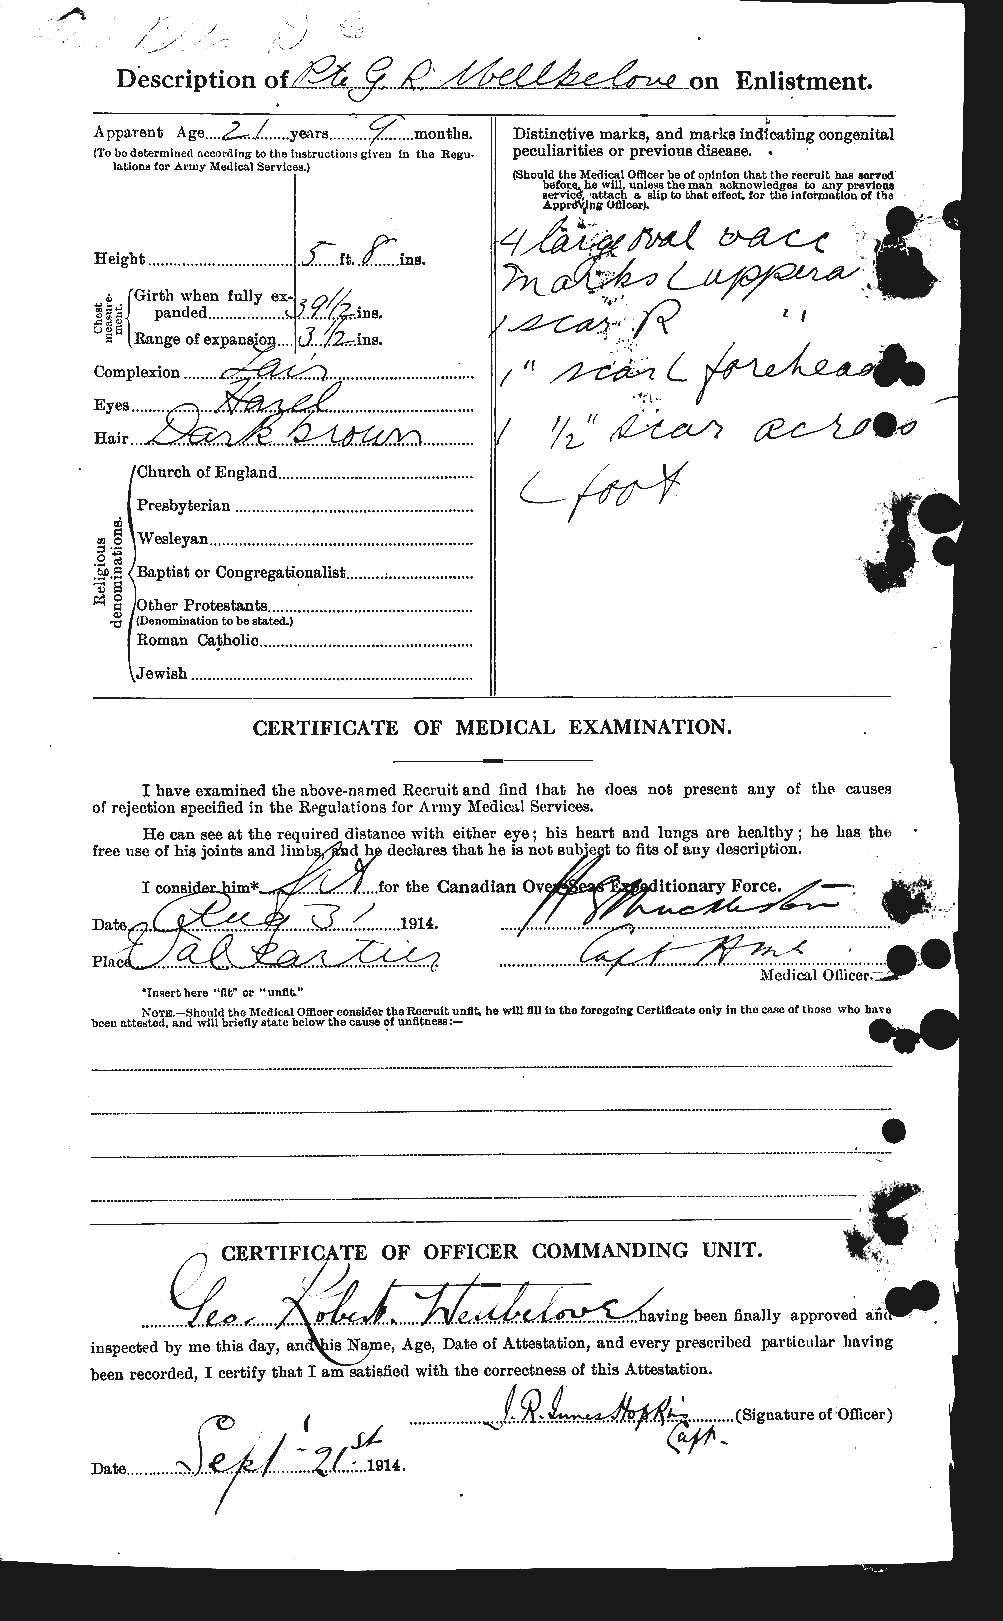 Personnel Records of the First World War - CEF 664863b